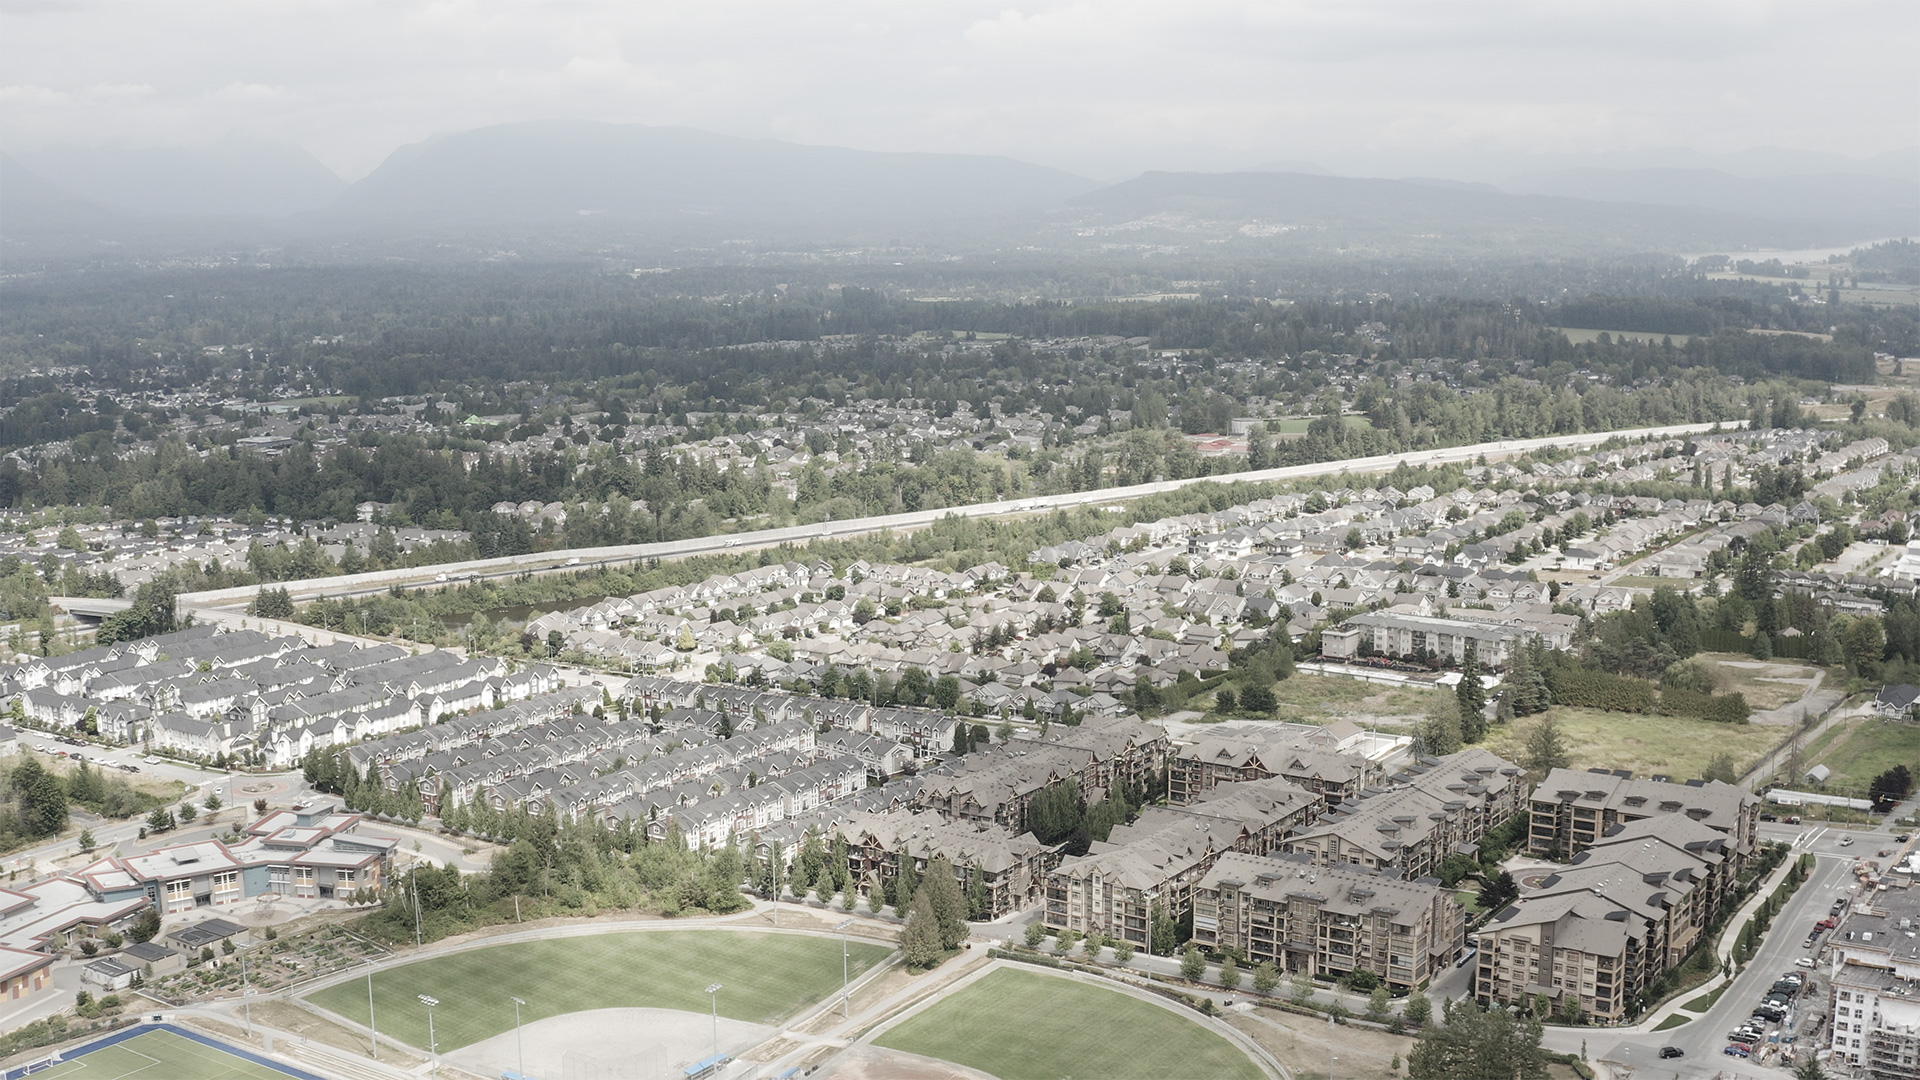 Langley: A Prospering and Family Oriented Community